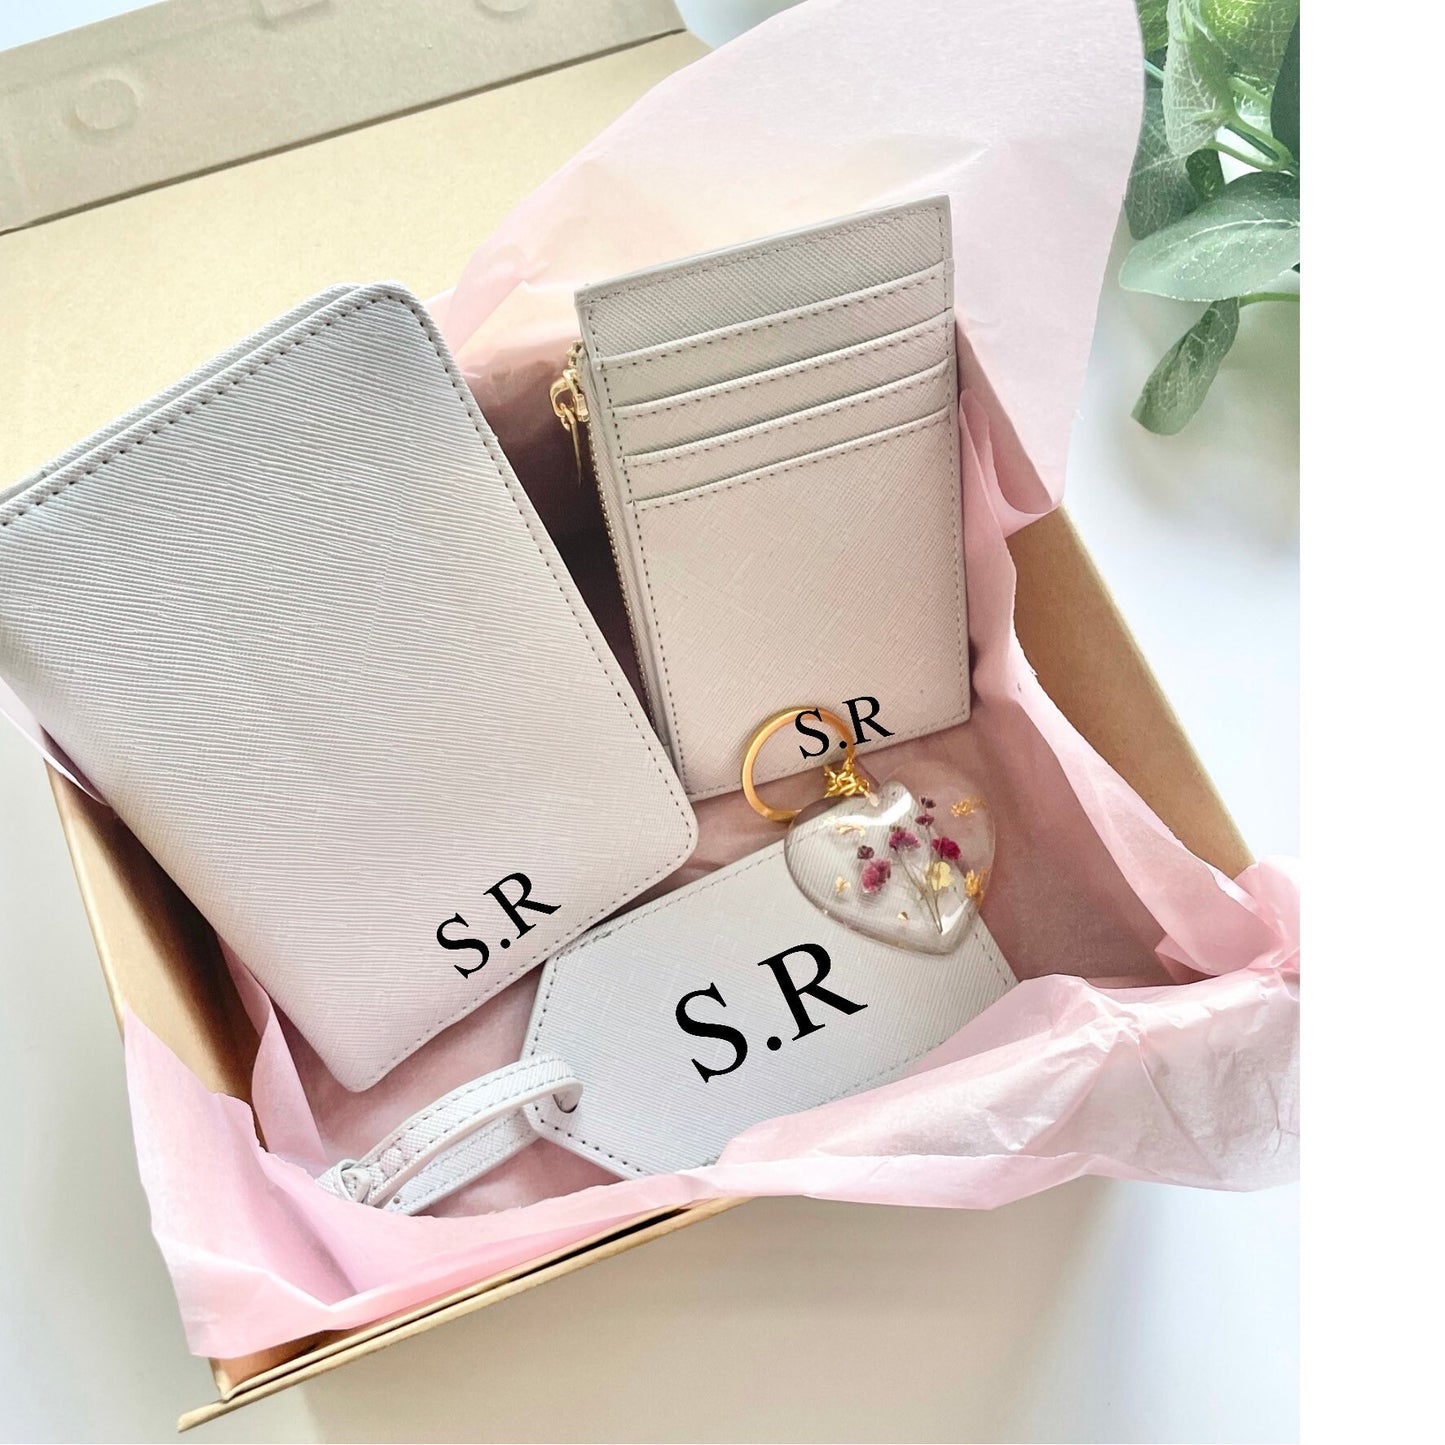 Personalised travel gift set for her, Mothers Day or Birthday gift set, luggage tag, passport cover, gold leaf resin keychain,